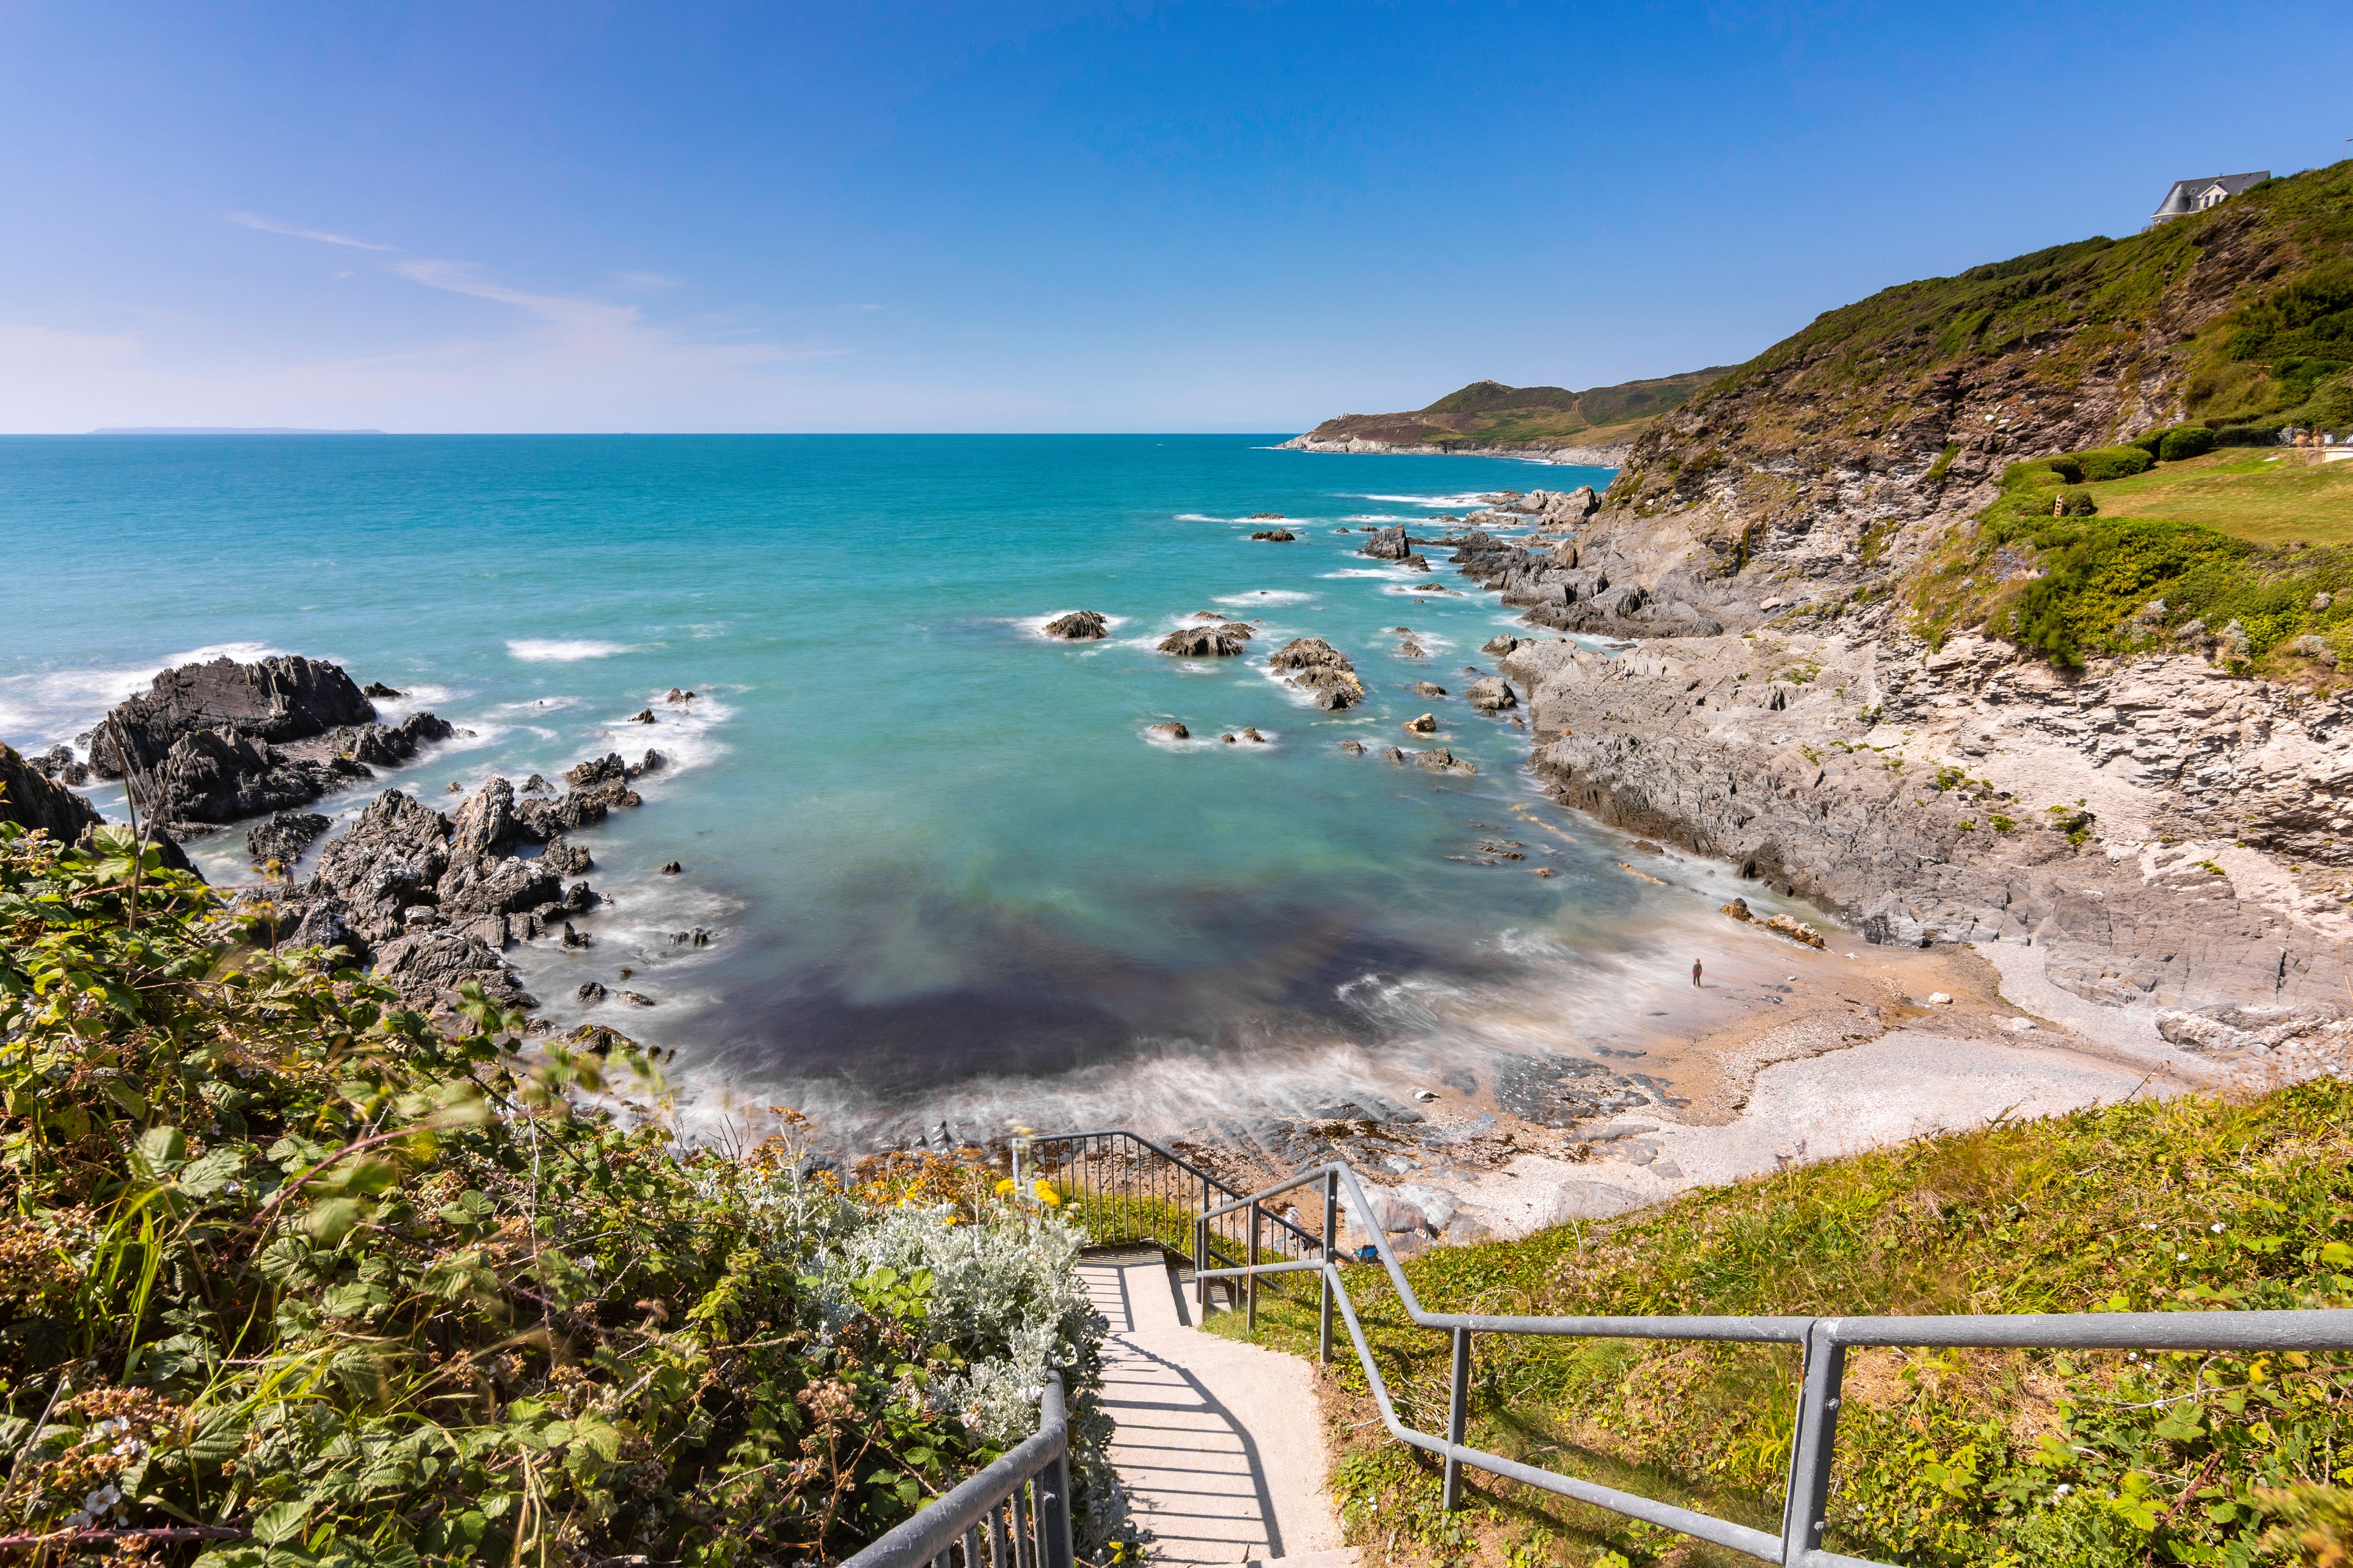 Blue waters and sandy beaches at Woolacombe in Devon